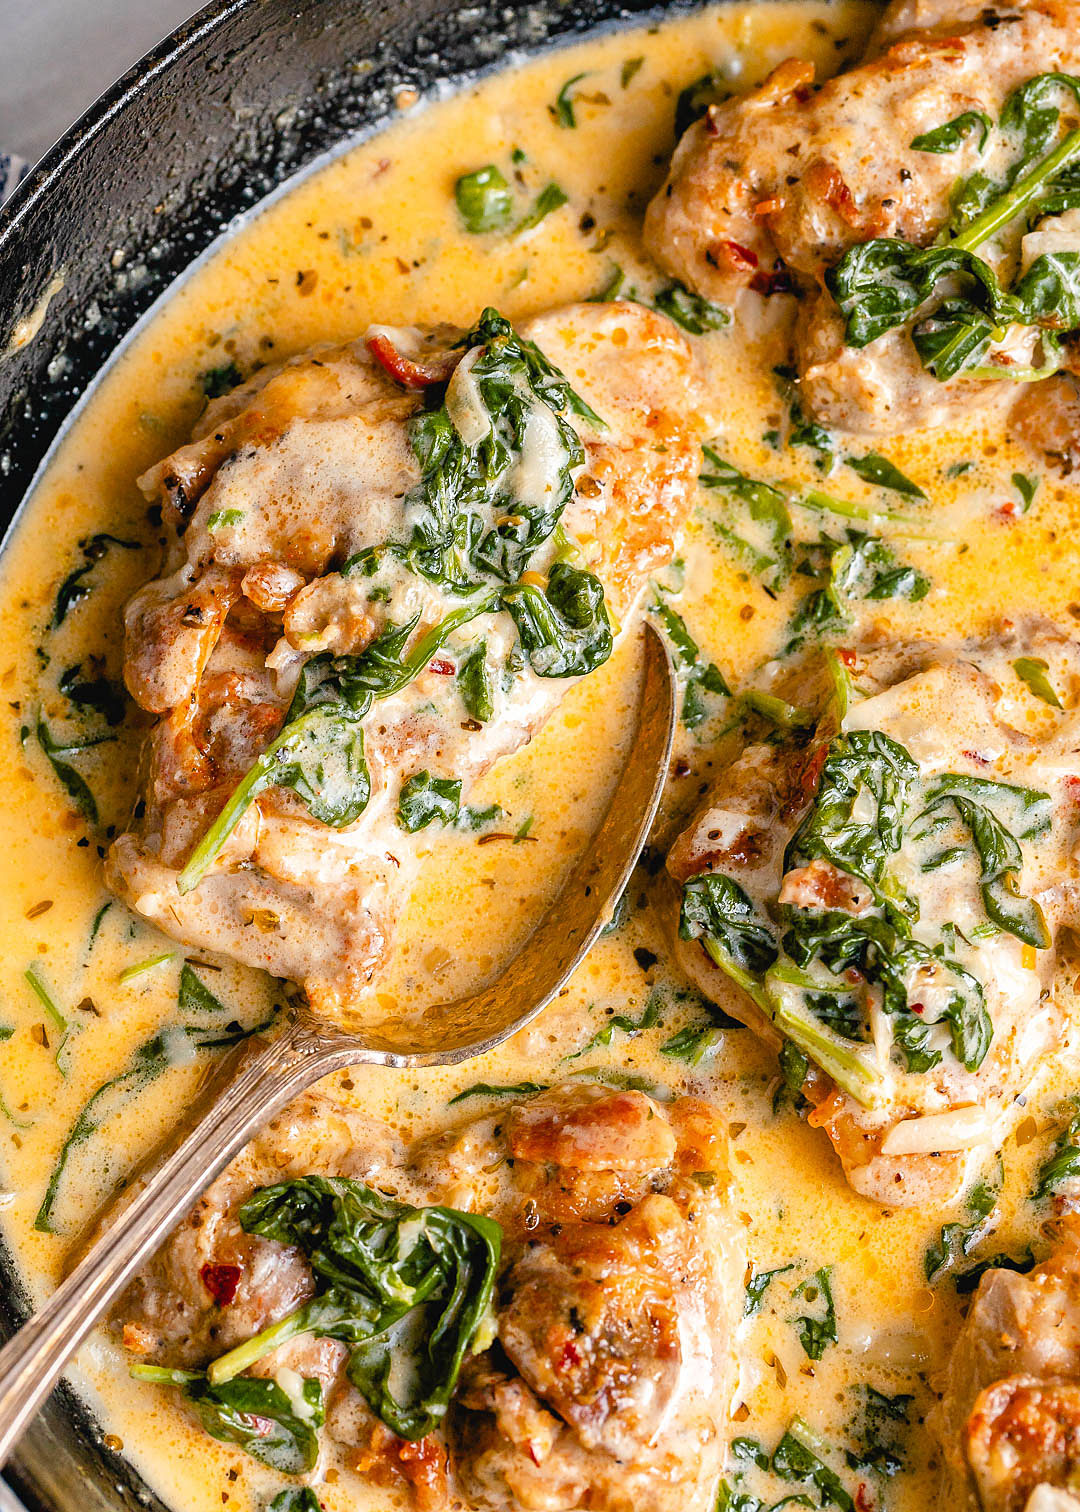 Chicken Dinner Ideas 25 Easy Sunday Dinner Ideas With Chicken Southern Living / Chicken is